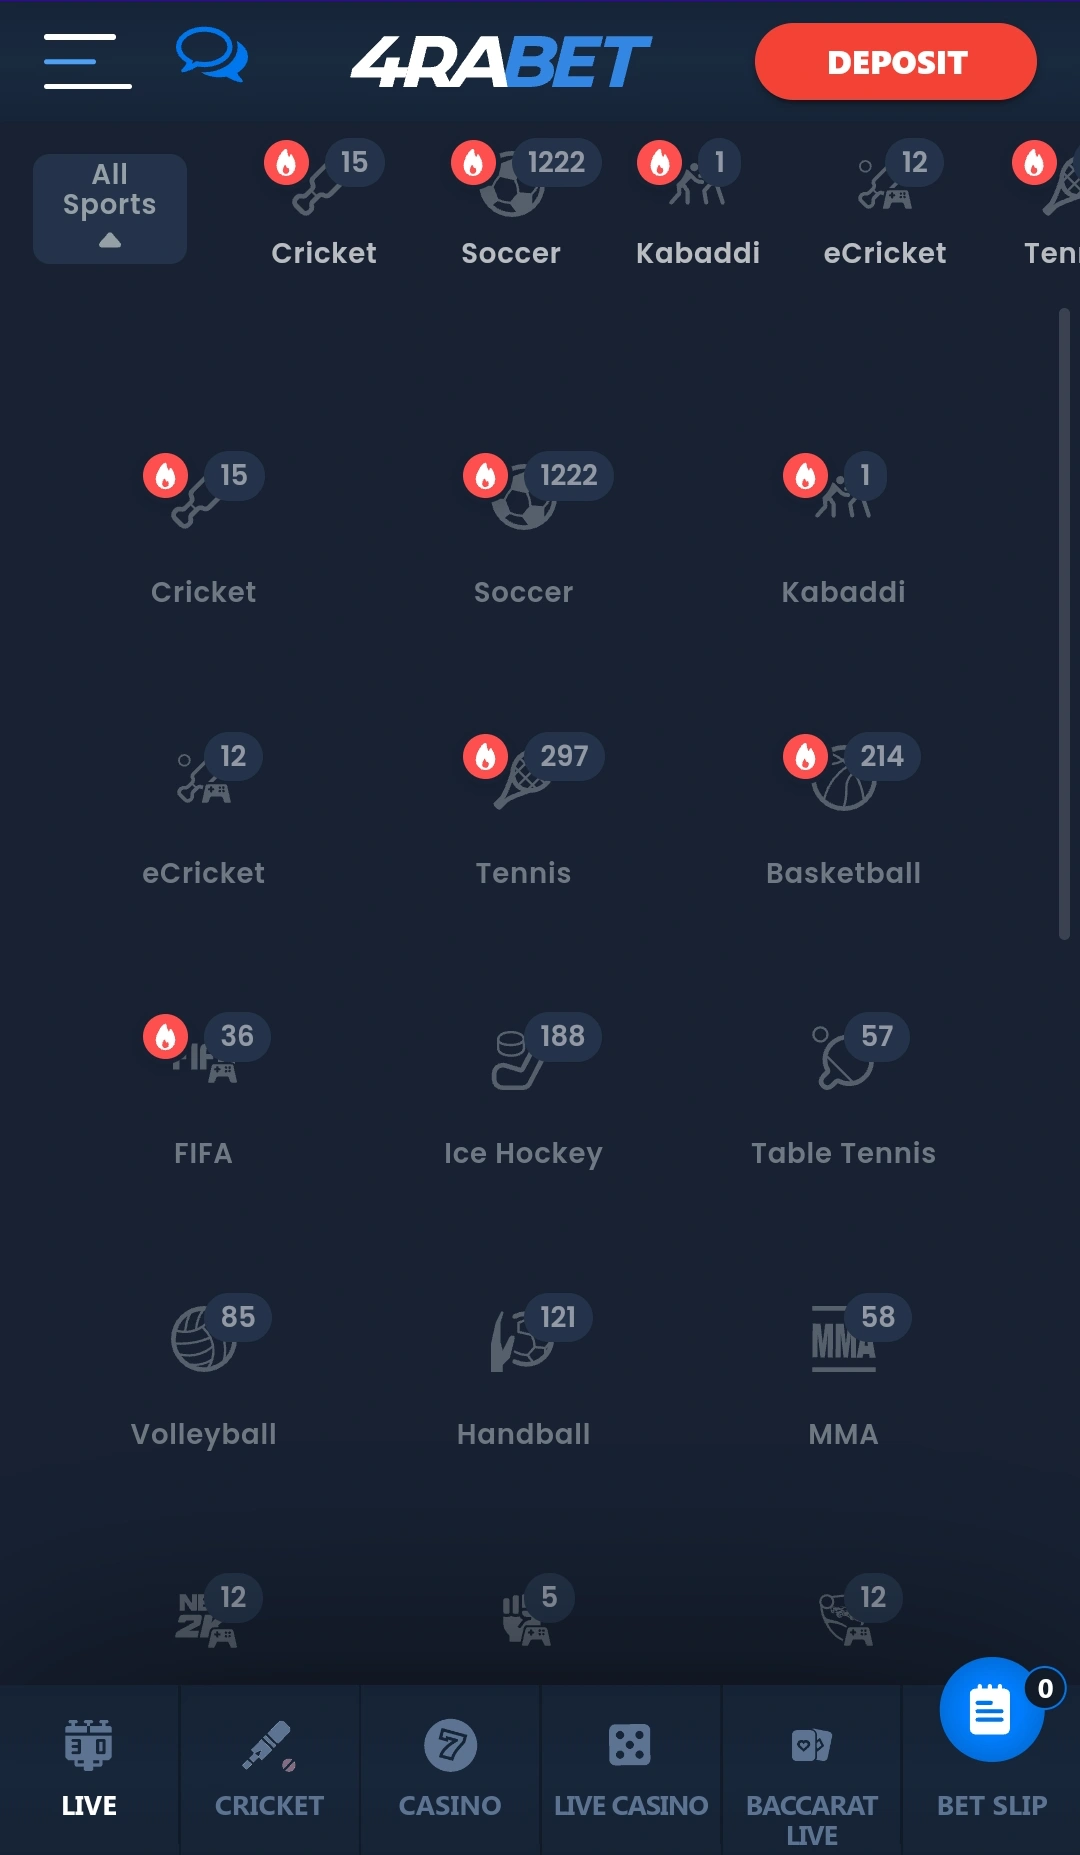 List of available sports for betting